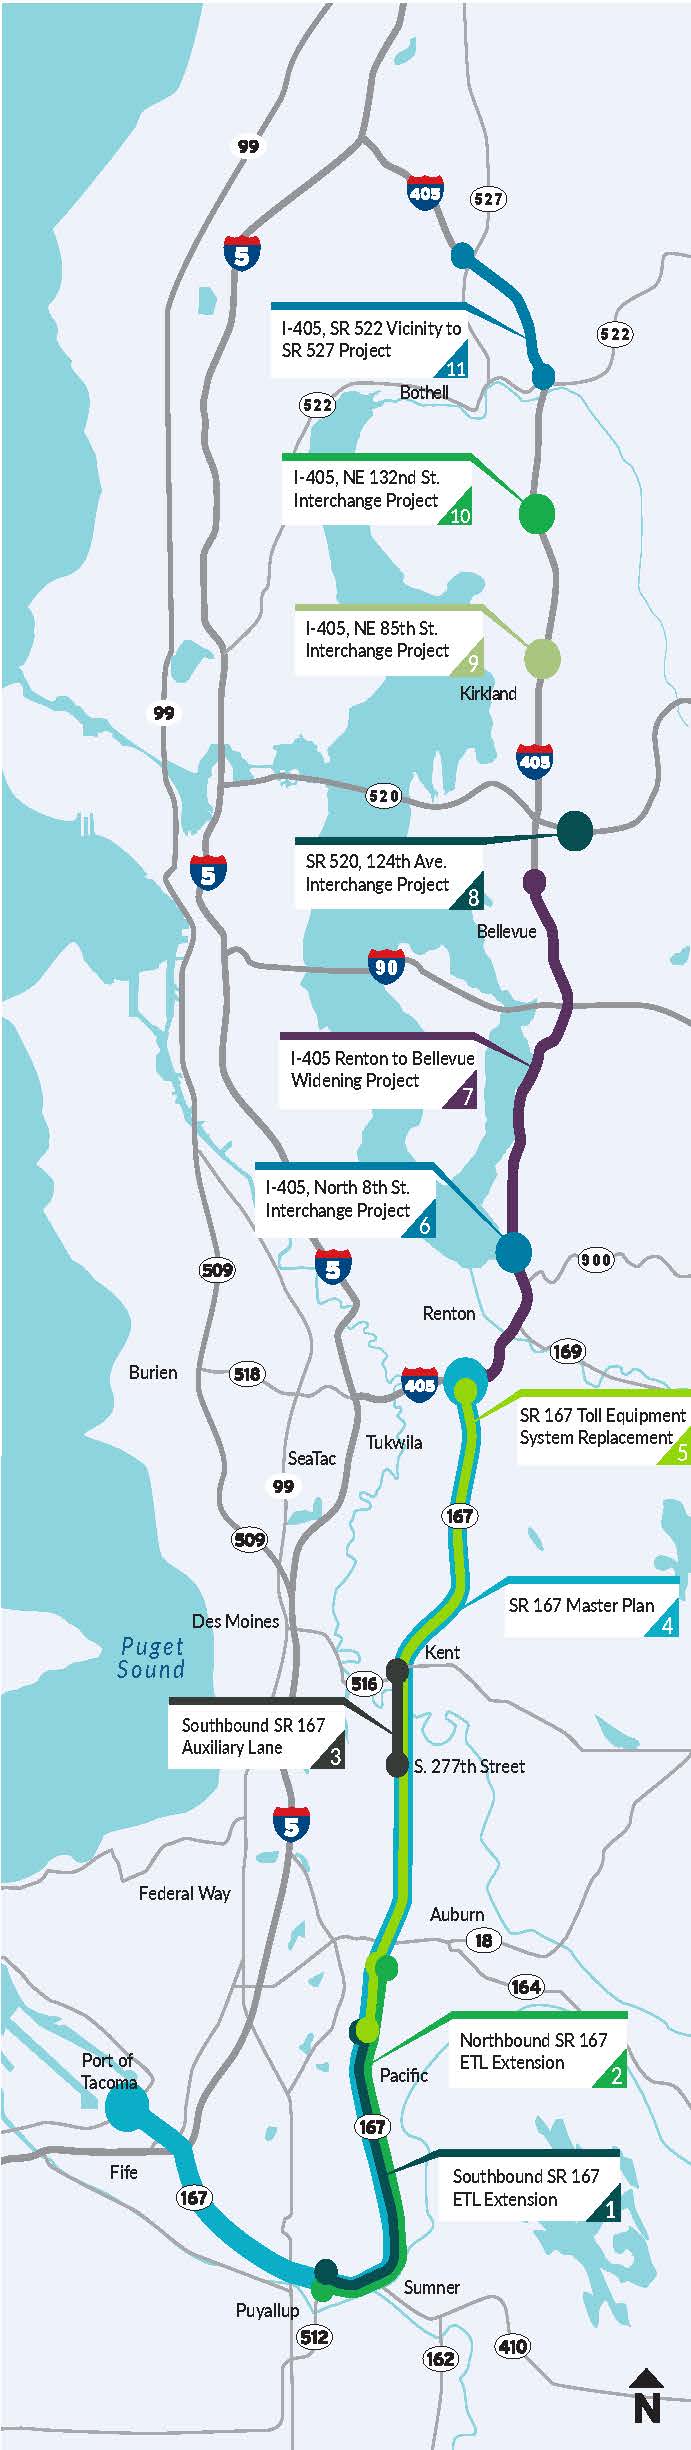 Map showing the projects that make up the I-405/SR 167 Corridor Program.